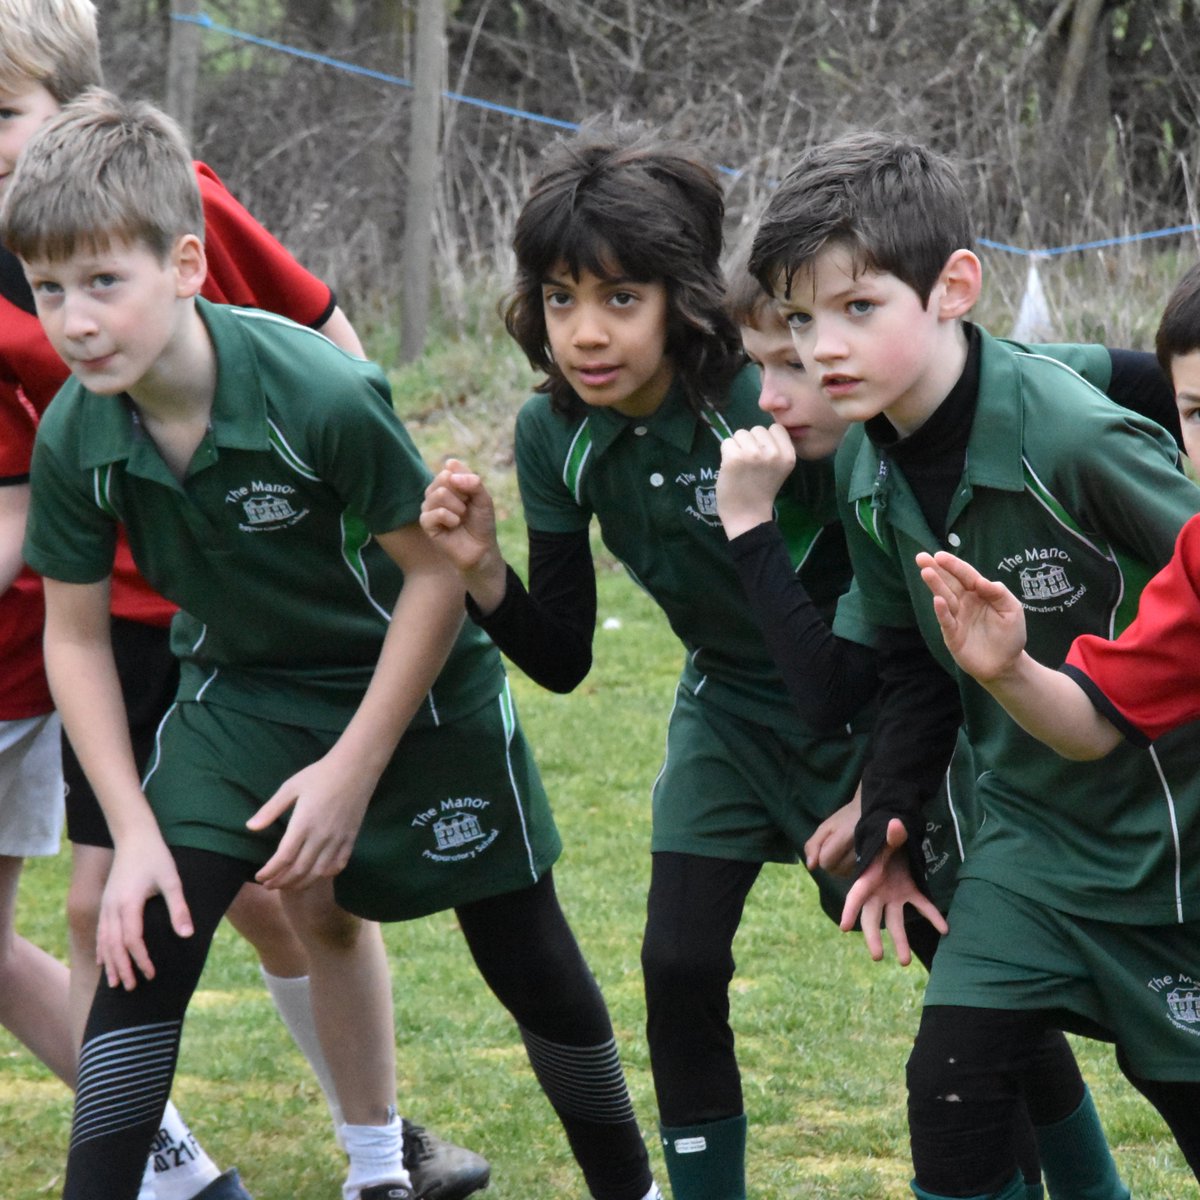 We hosted a Cross Country event on Friday, thank you to all the schools who joined us.
#ManorPrep #CrossCountry #Running #Sport 
@abingdonprep @SHSKJuniors @theabbey_jnr @CHSMoulsford @CothillHouse @SFSOxford @CokethorpeSch @CathedralSchool @MCSOxford @WJSWarwick @StGabsJuniors